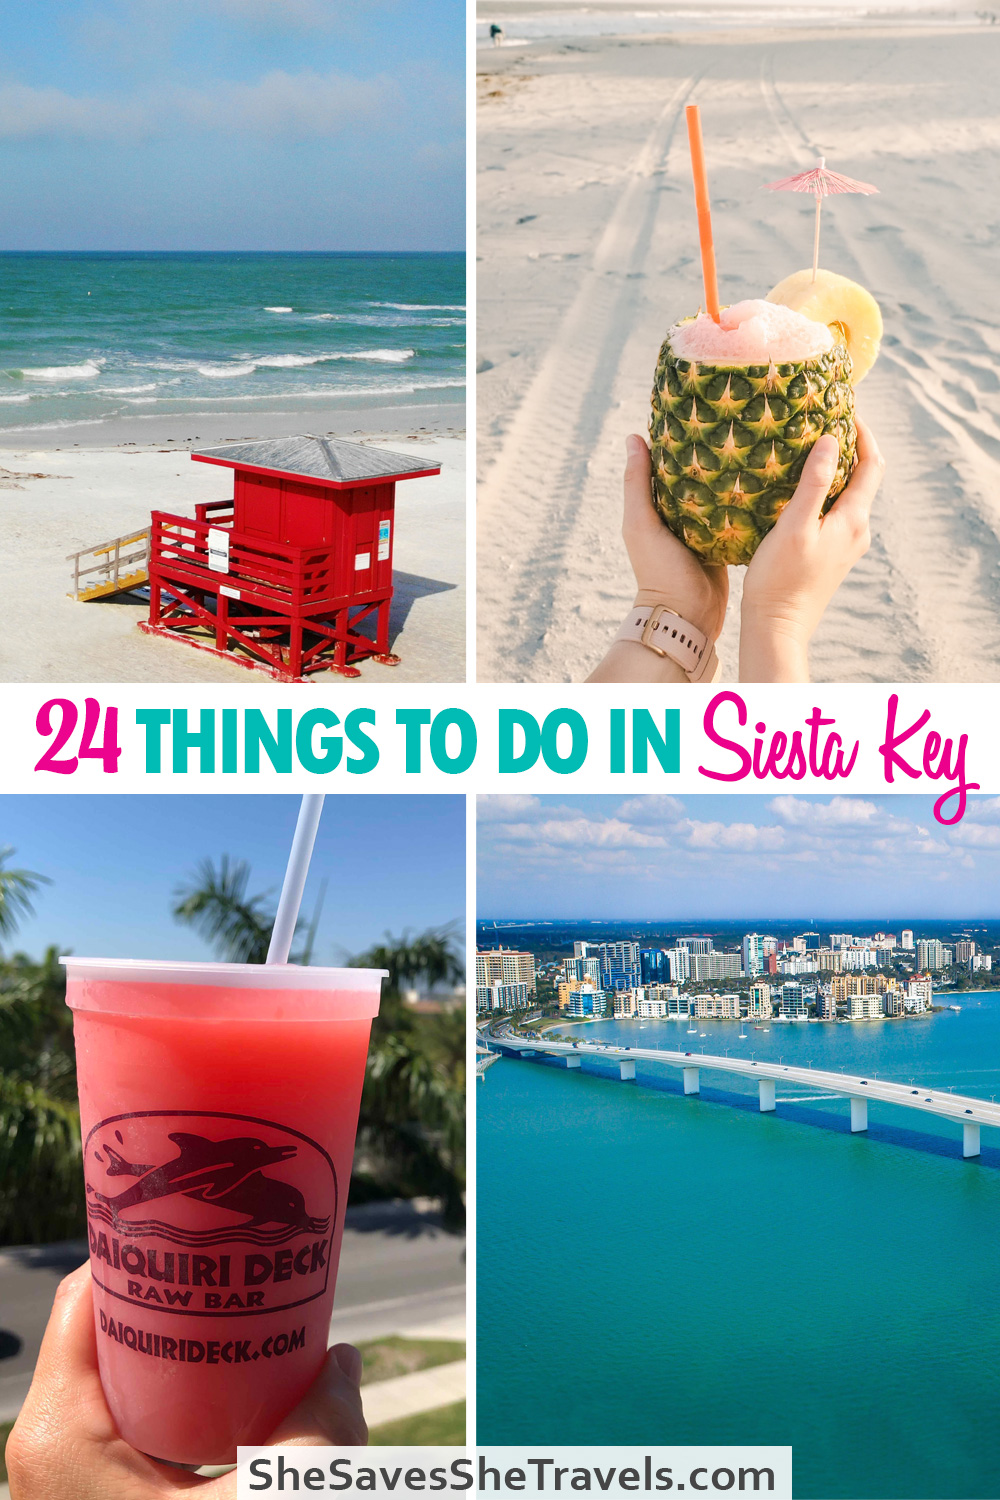 beach and food and drink images with text that reads 24 things to do in siesta key